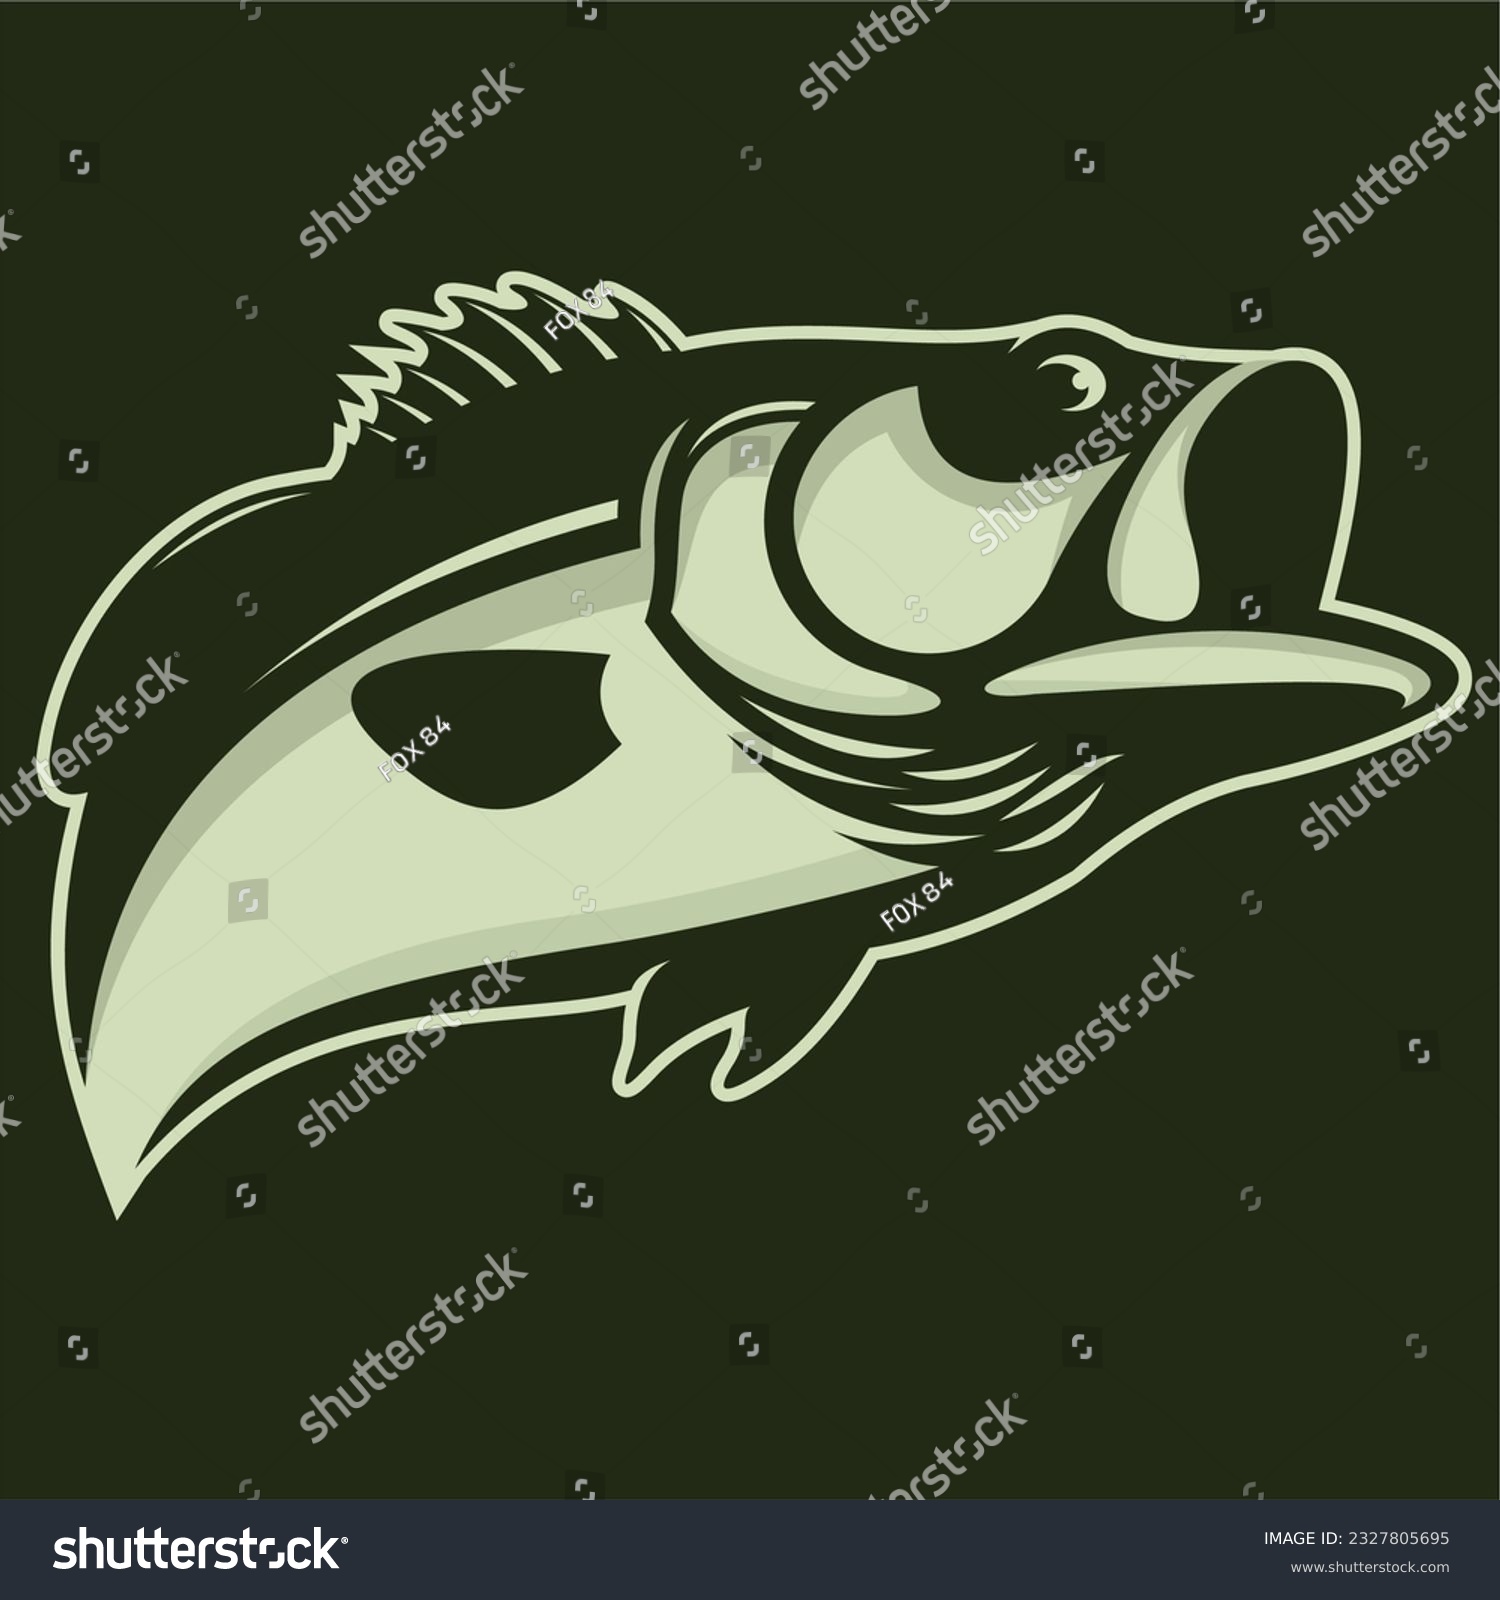 SVG of BASS FISH VECTOR FOR LOGO FISHING COMPANY svg